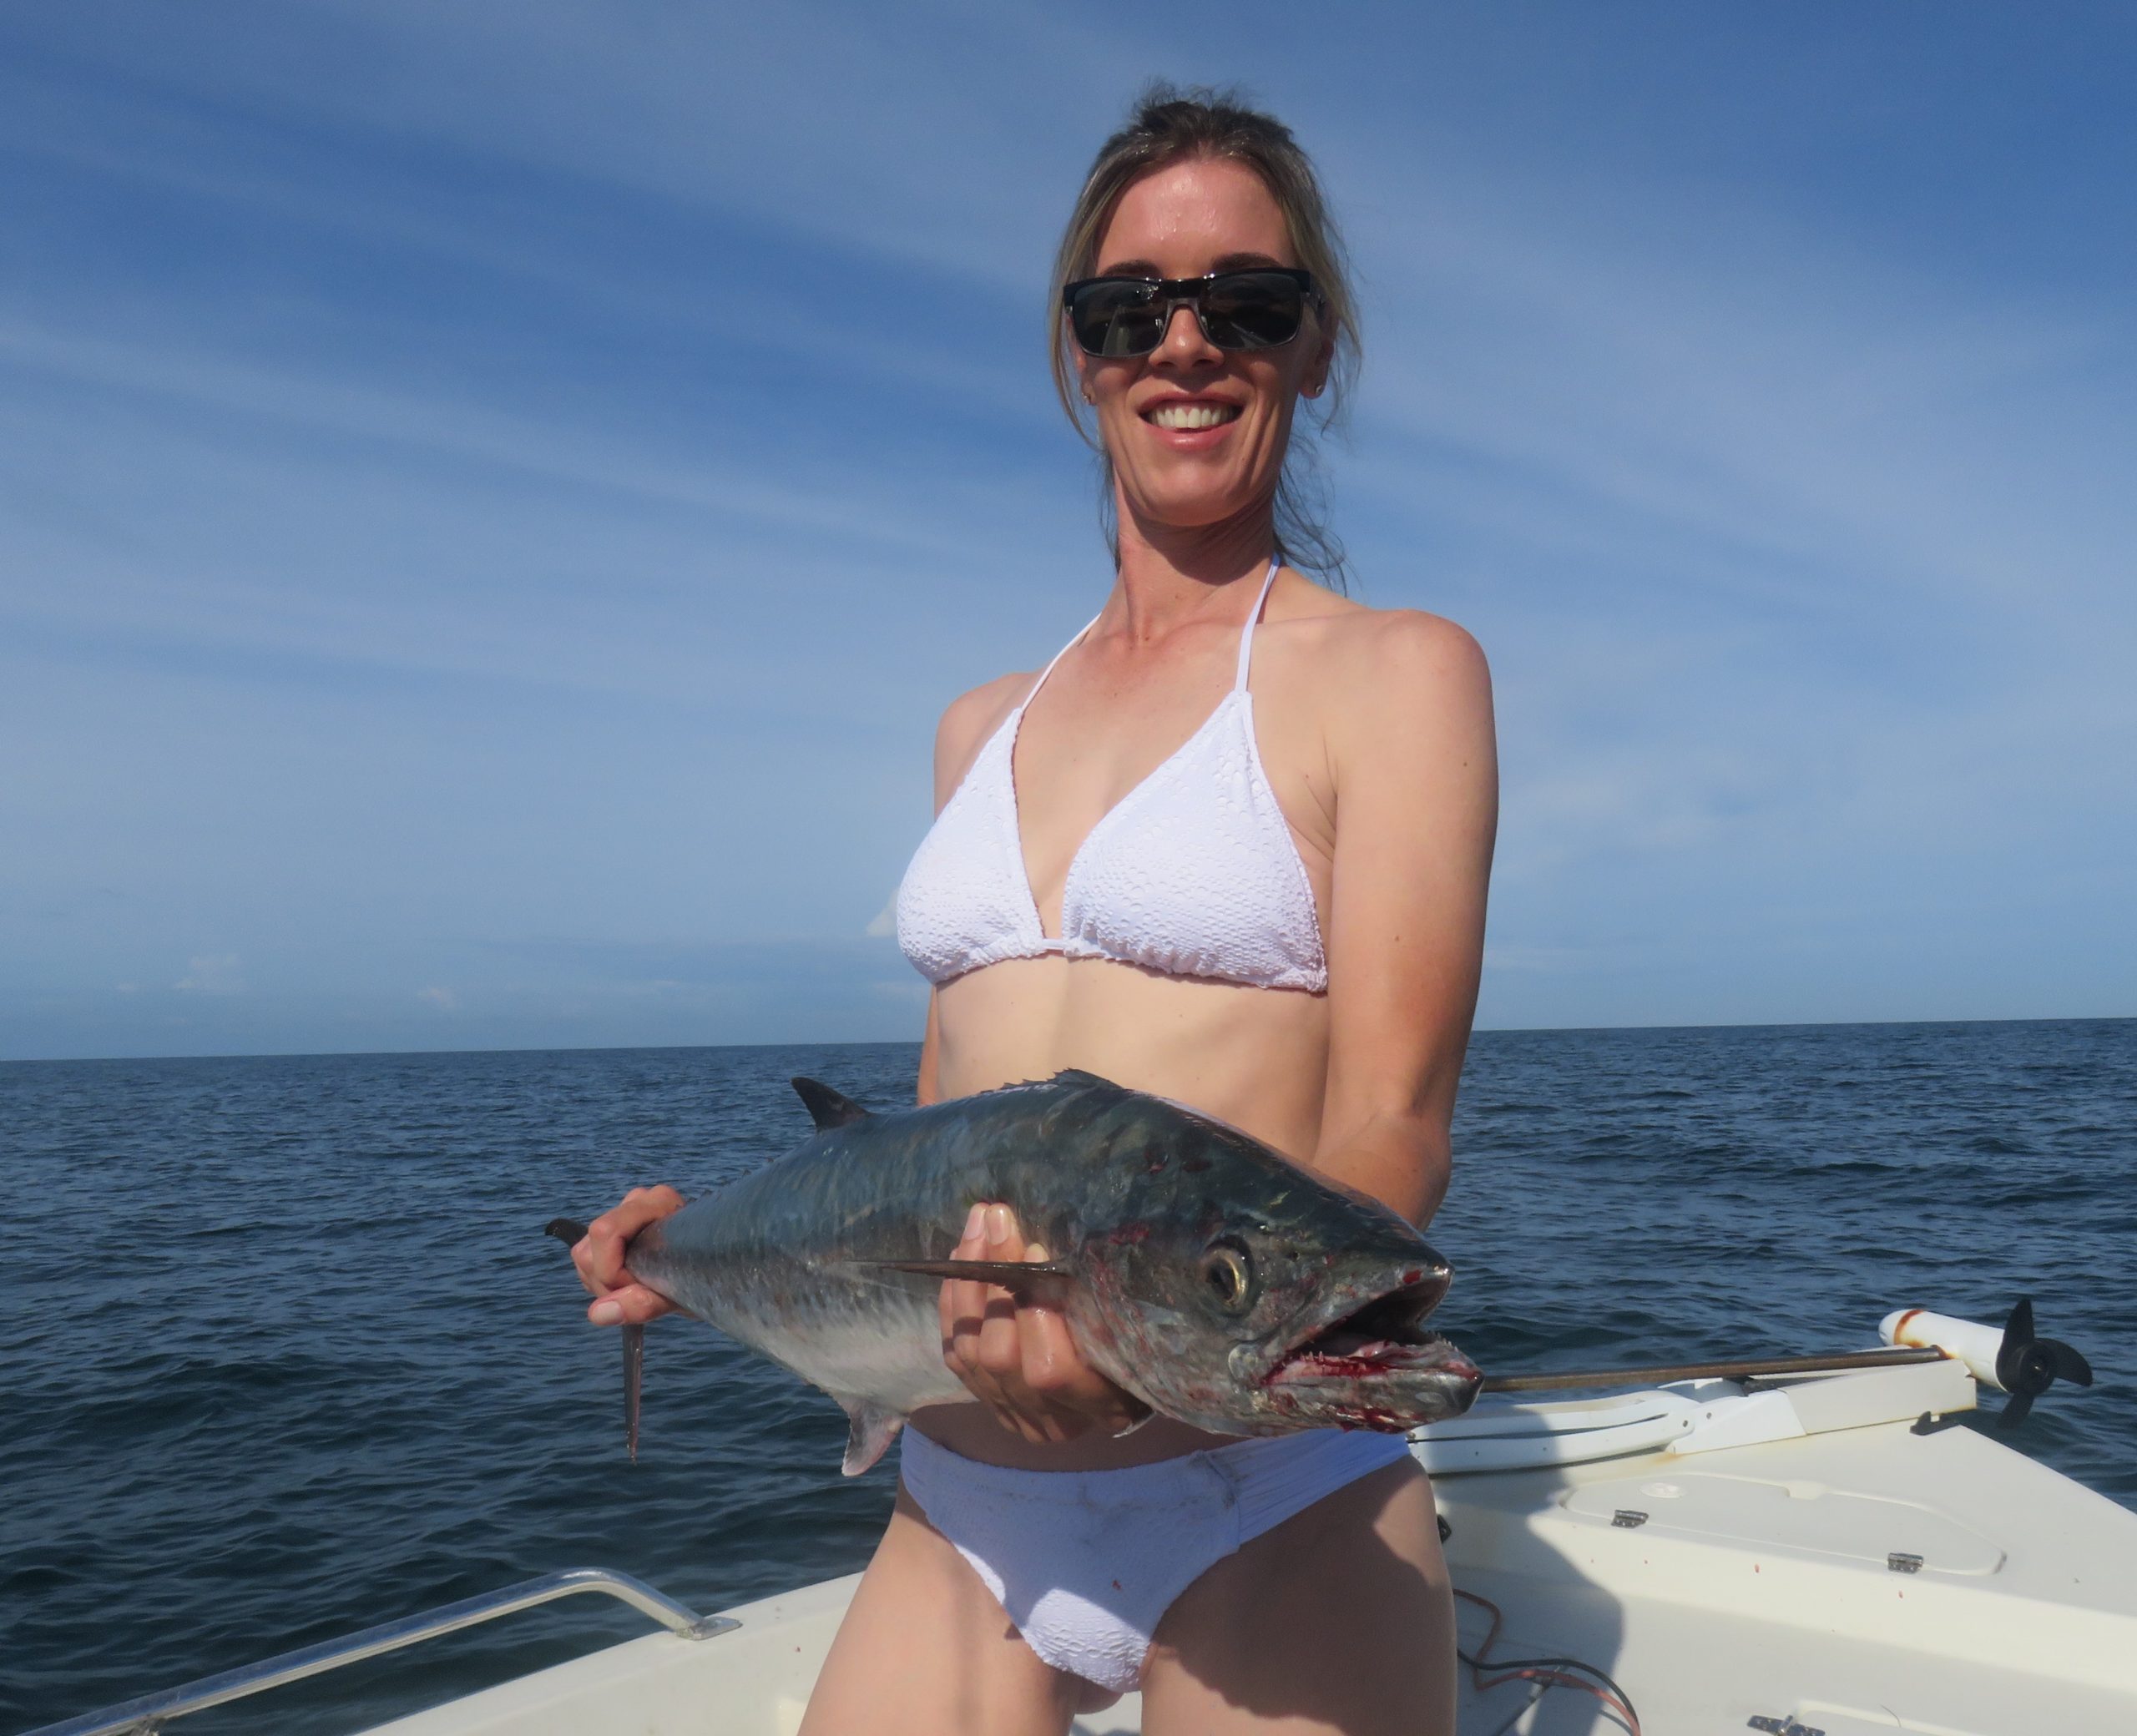 Saltwater Fishing with Spoons! – Siesta Key Fishing Charters